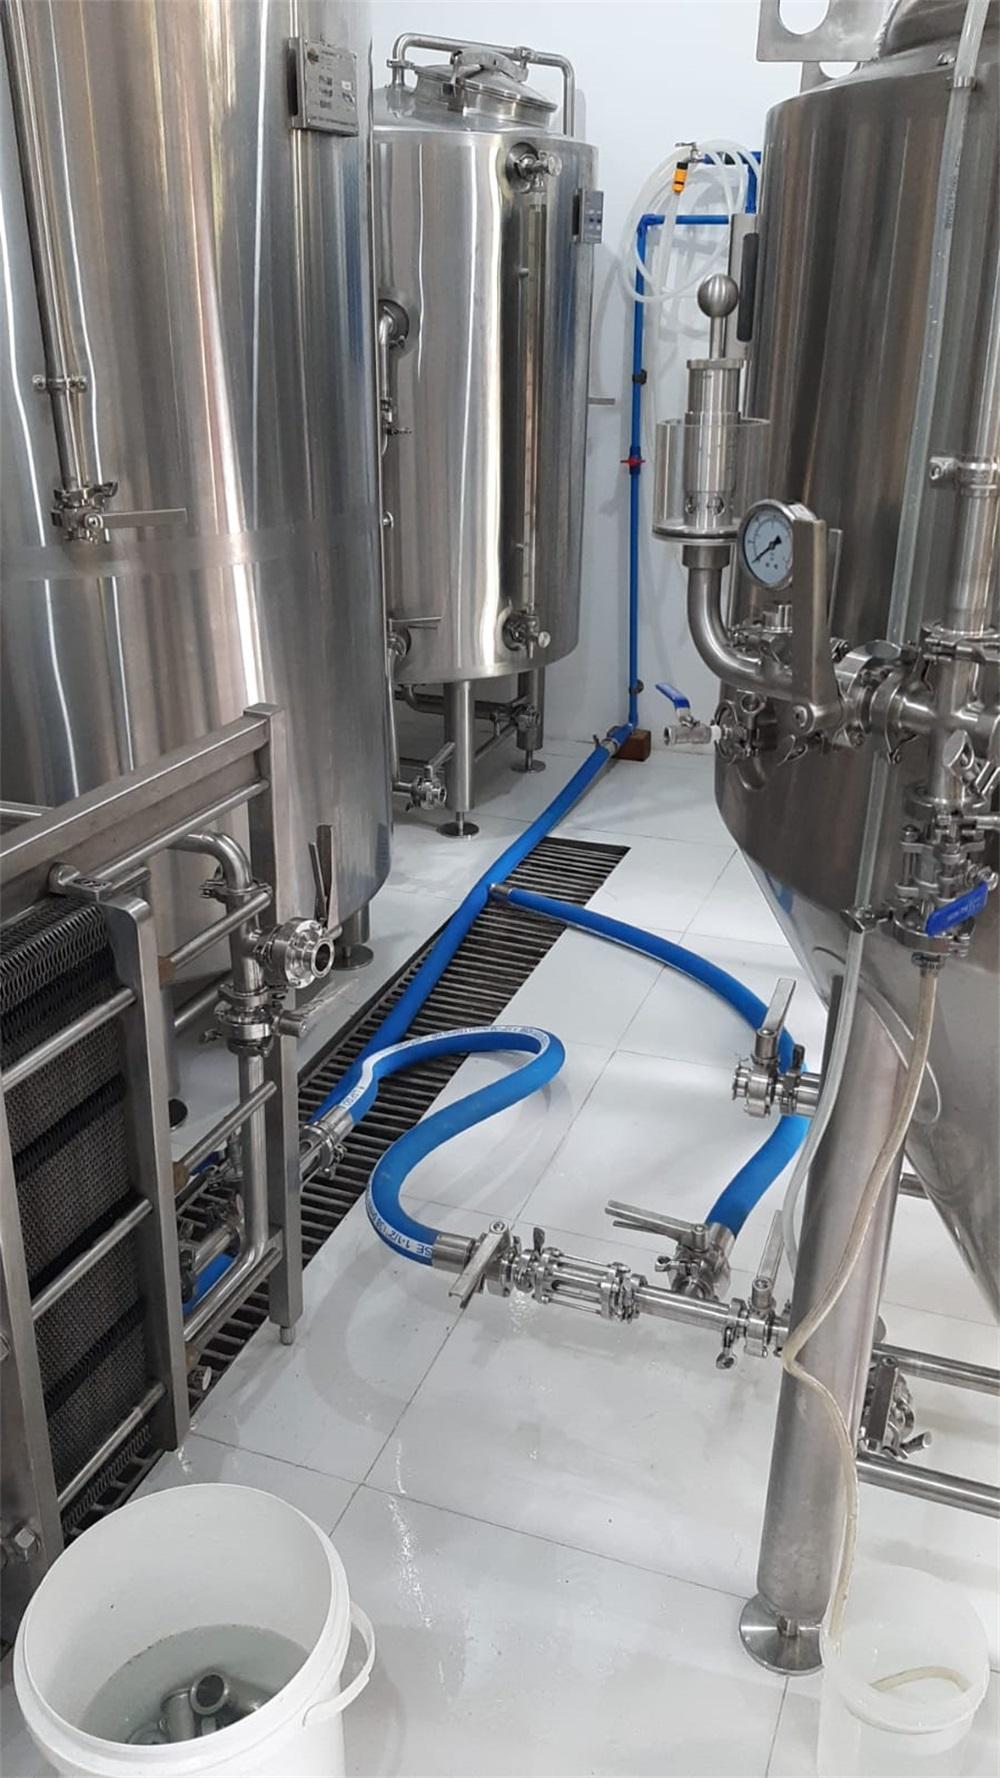 First Brew Beer, TIANTAI 350L Brewery System, The Philippines Breweries, nanobrewery beer brewing system, customized brewhouse vessel